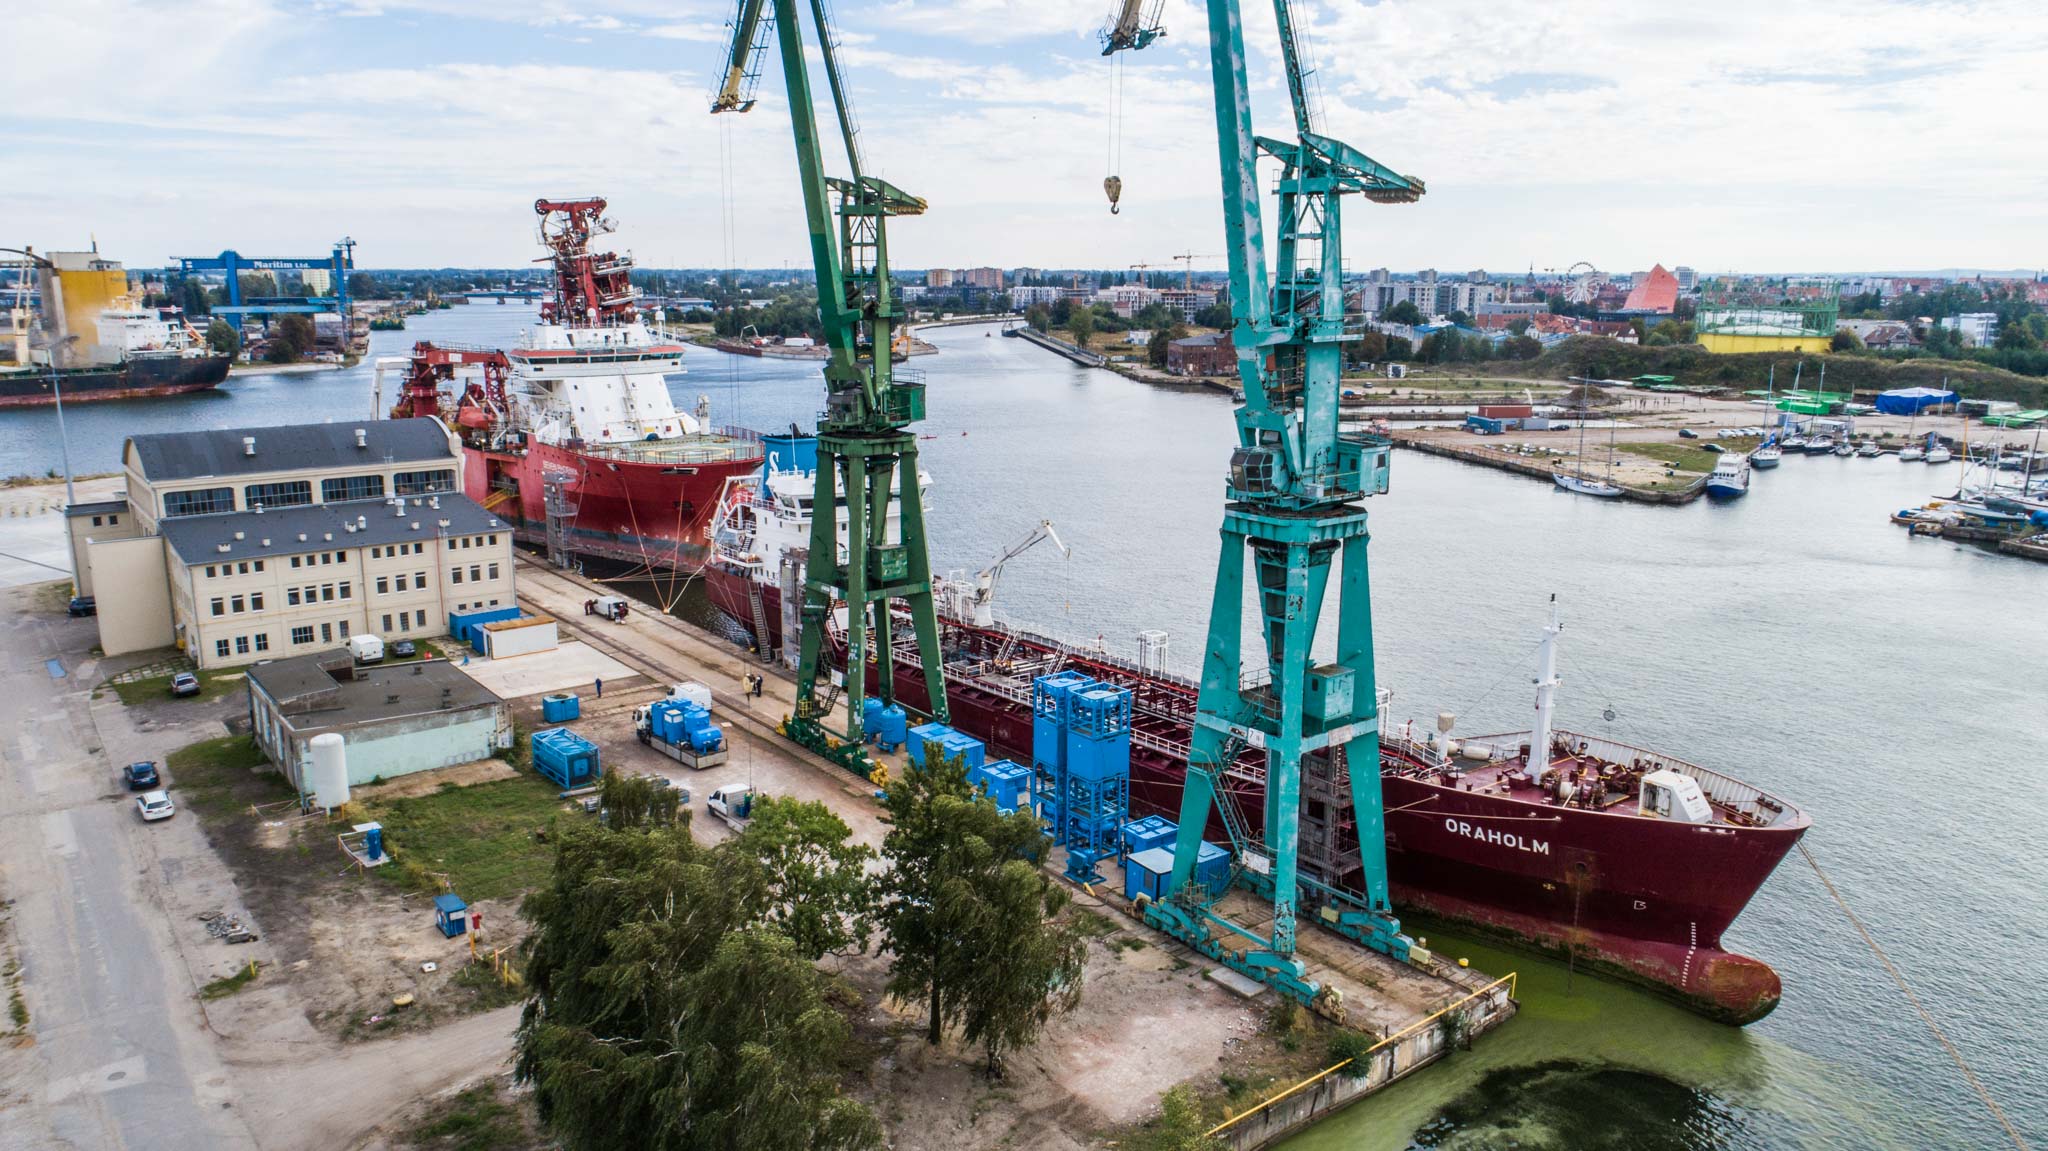 Muehlhan Polska: comprehensive repairs of paint coatings with eco-friendly system - MarinePoland.com